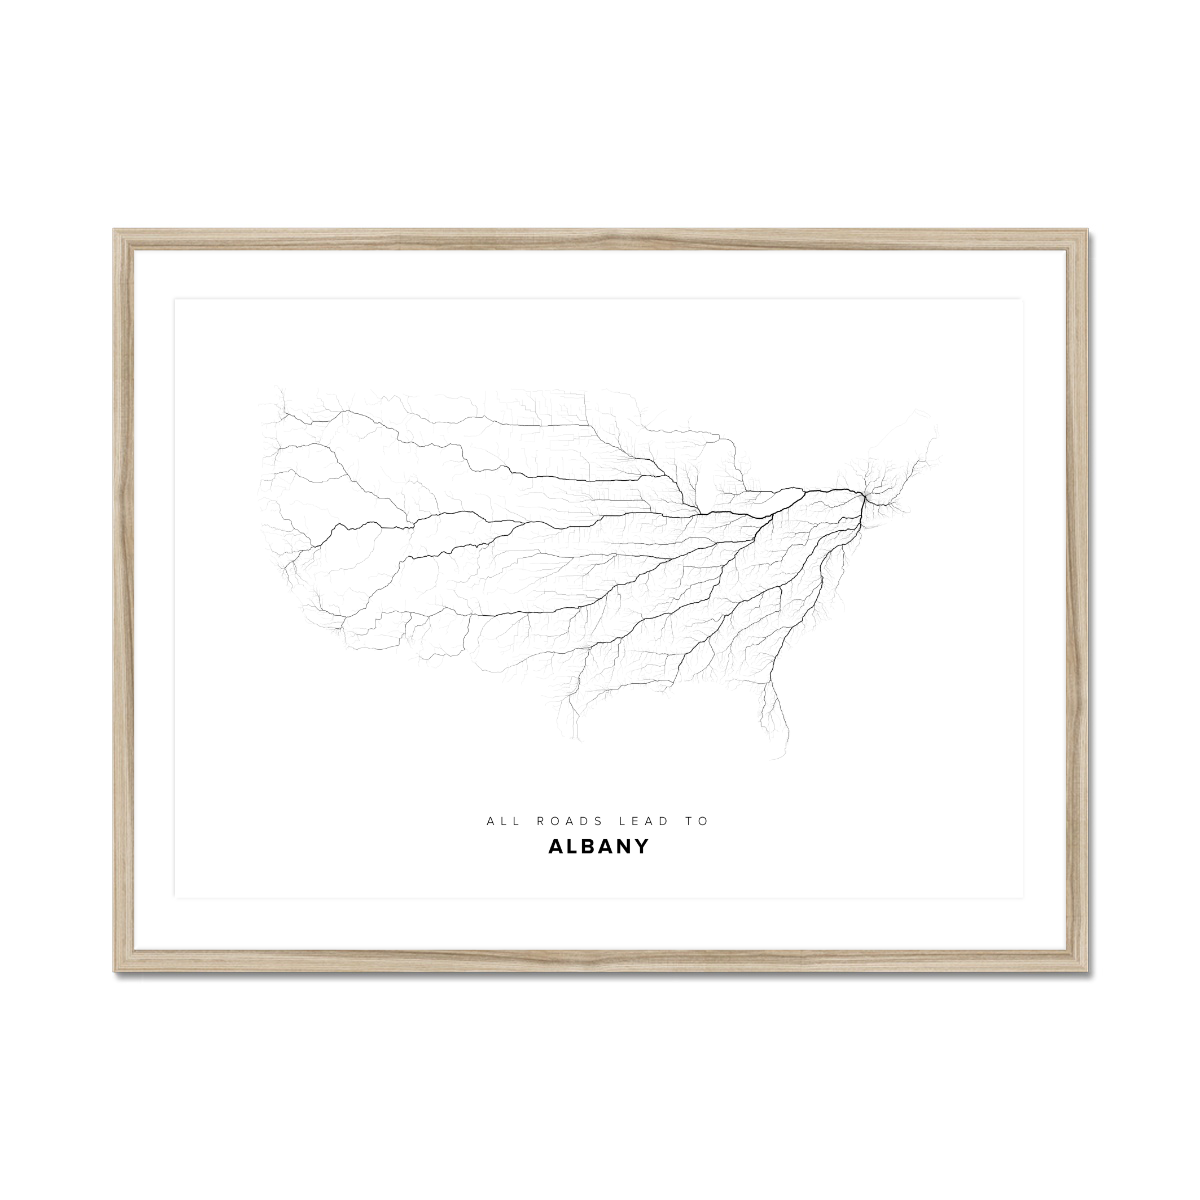 All roads lead to Albany (United States of America) Fine Art Map Print